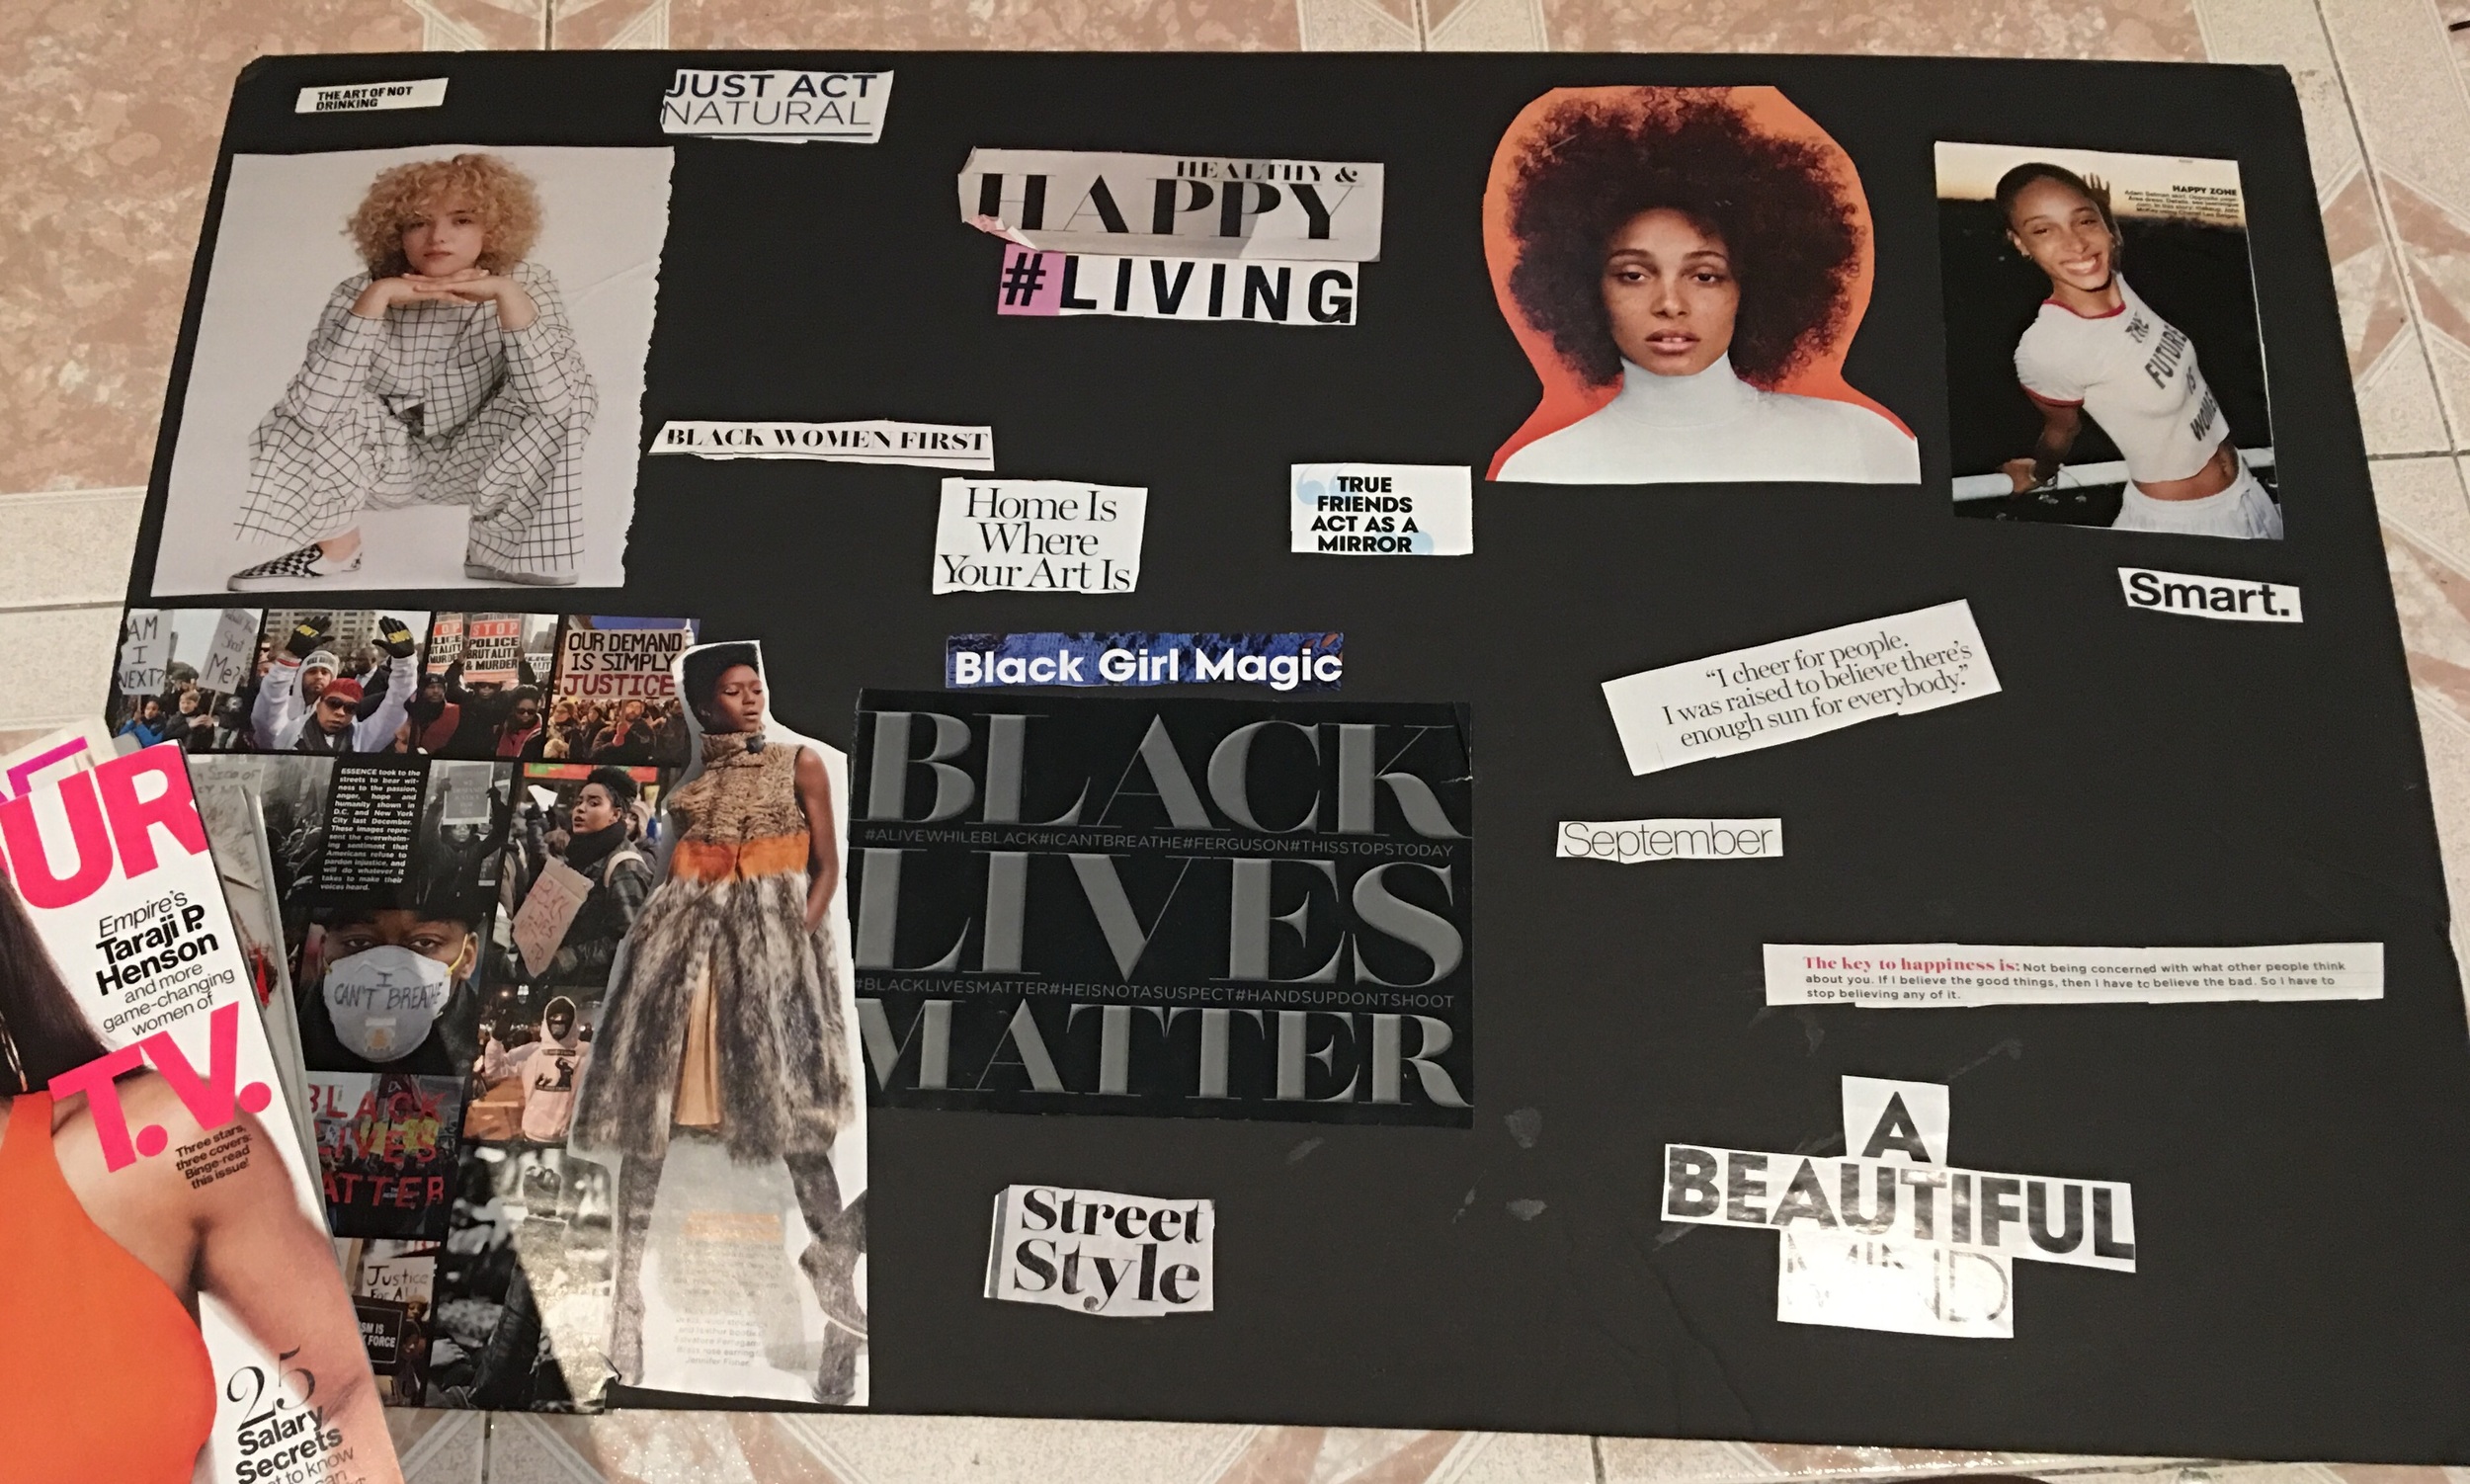 True Life: My Vision Board Gave Me No Vision — Her Neck of the Woods